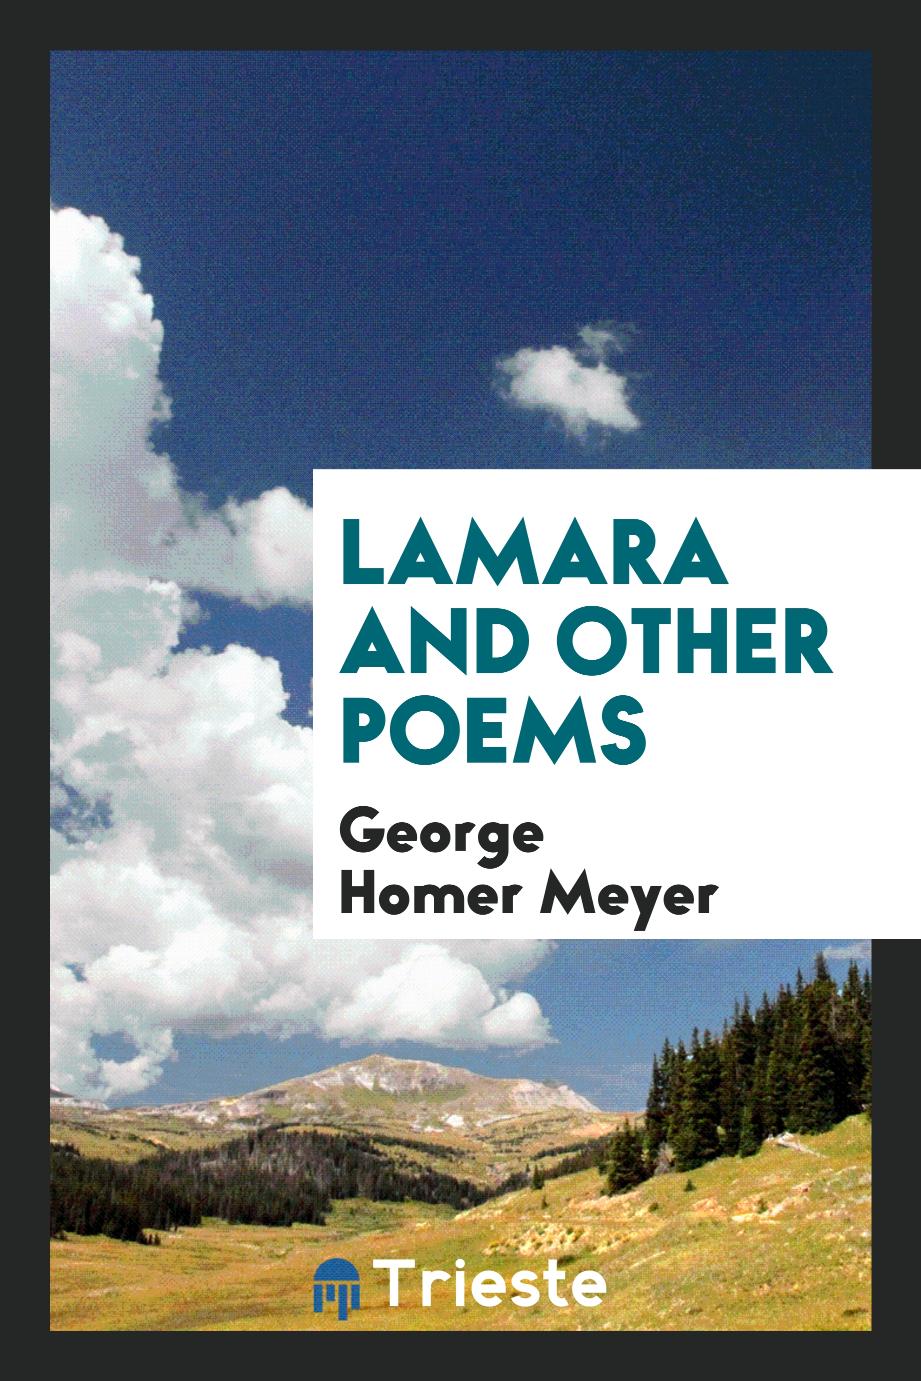 Lamara and Other Poems